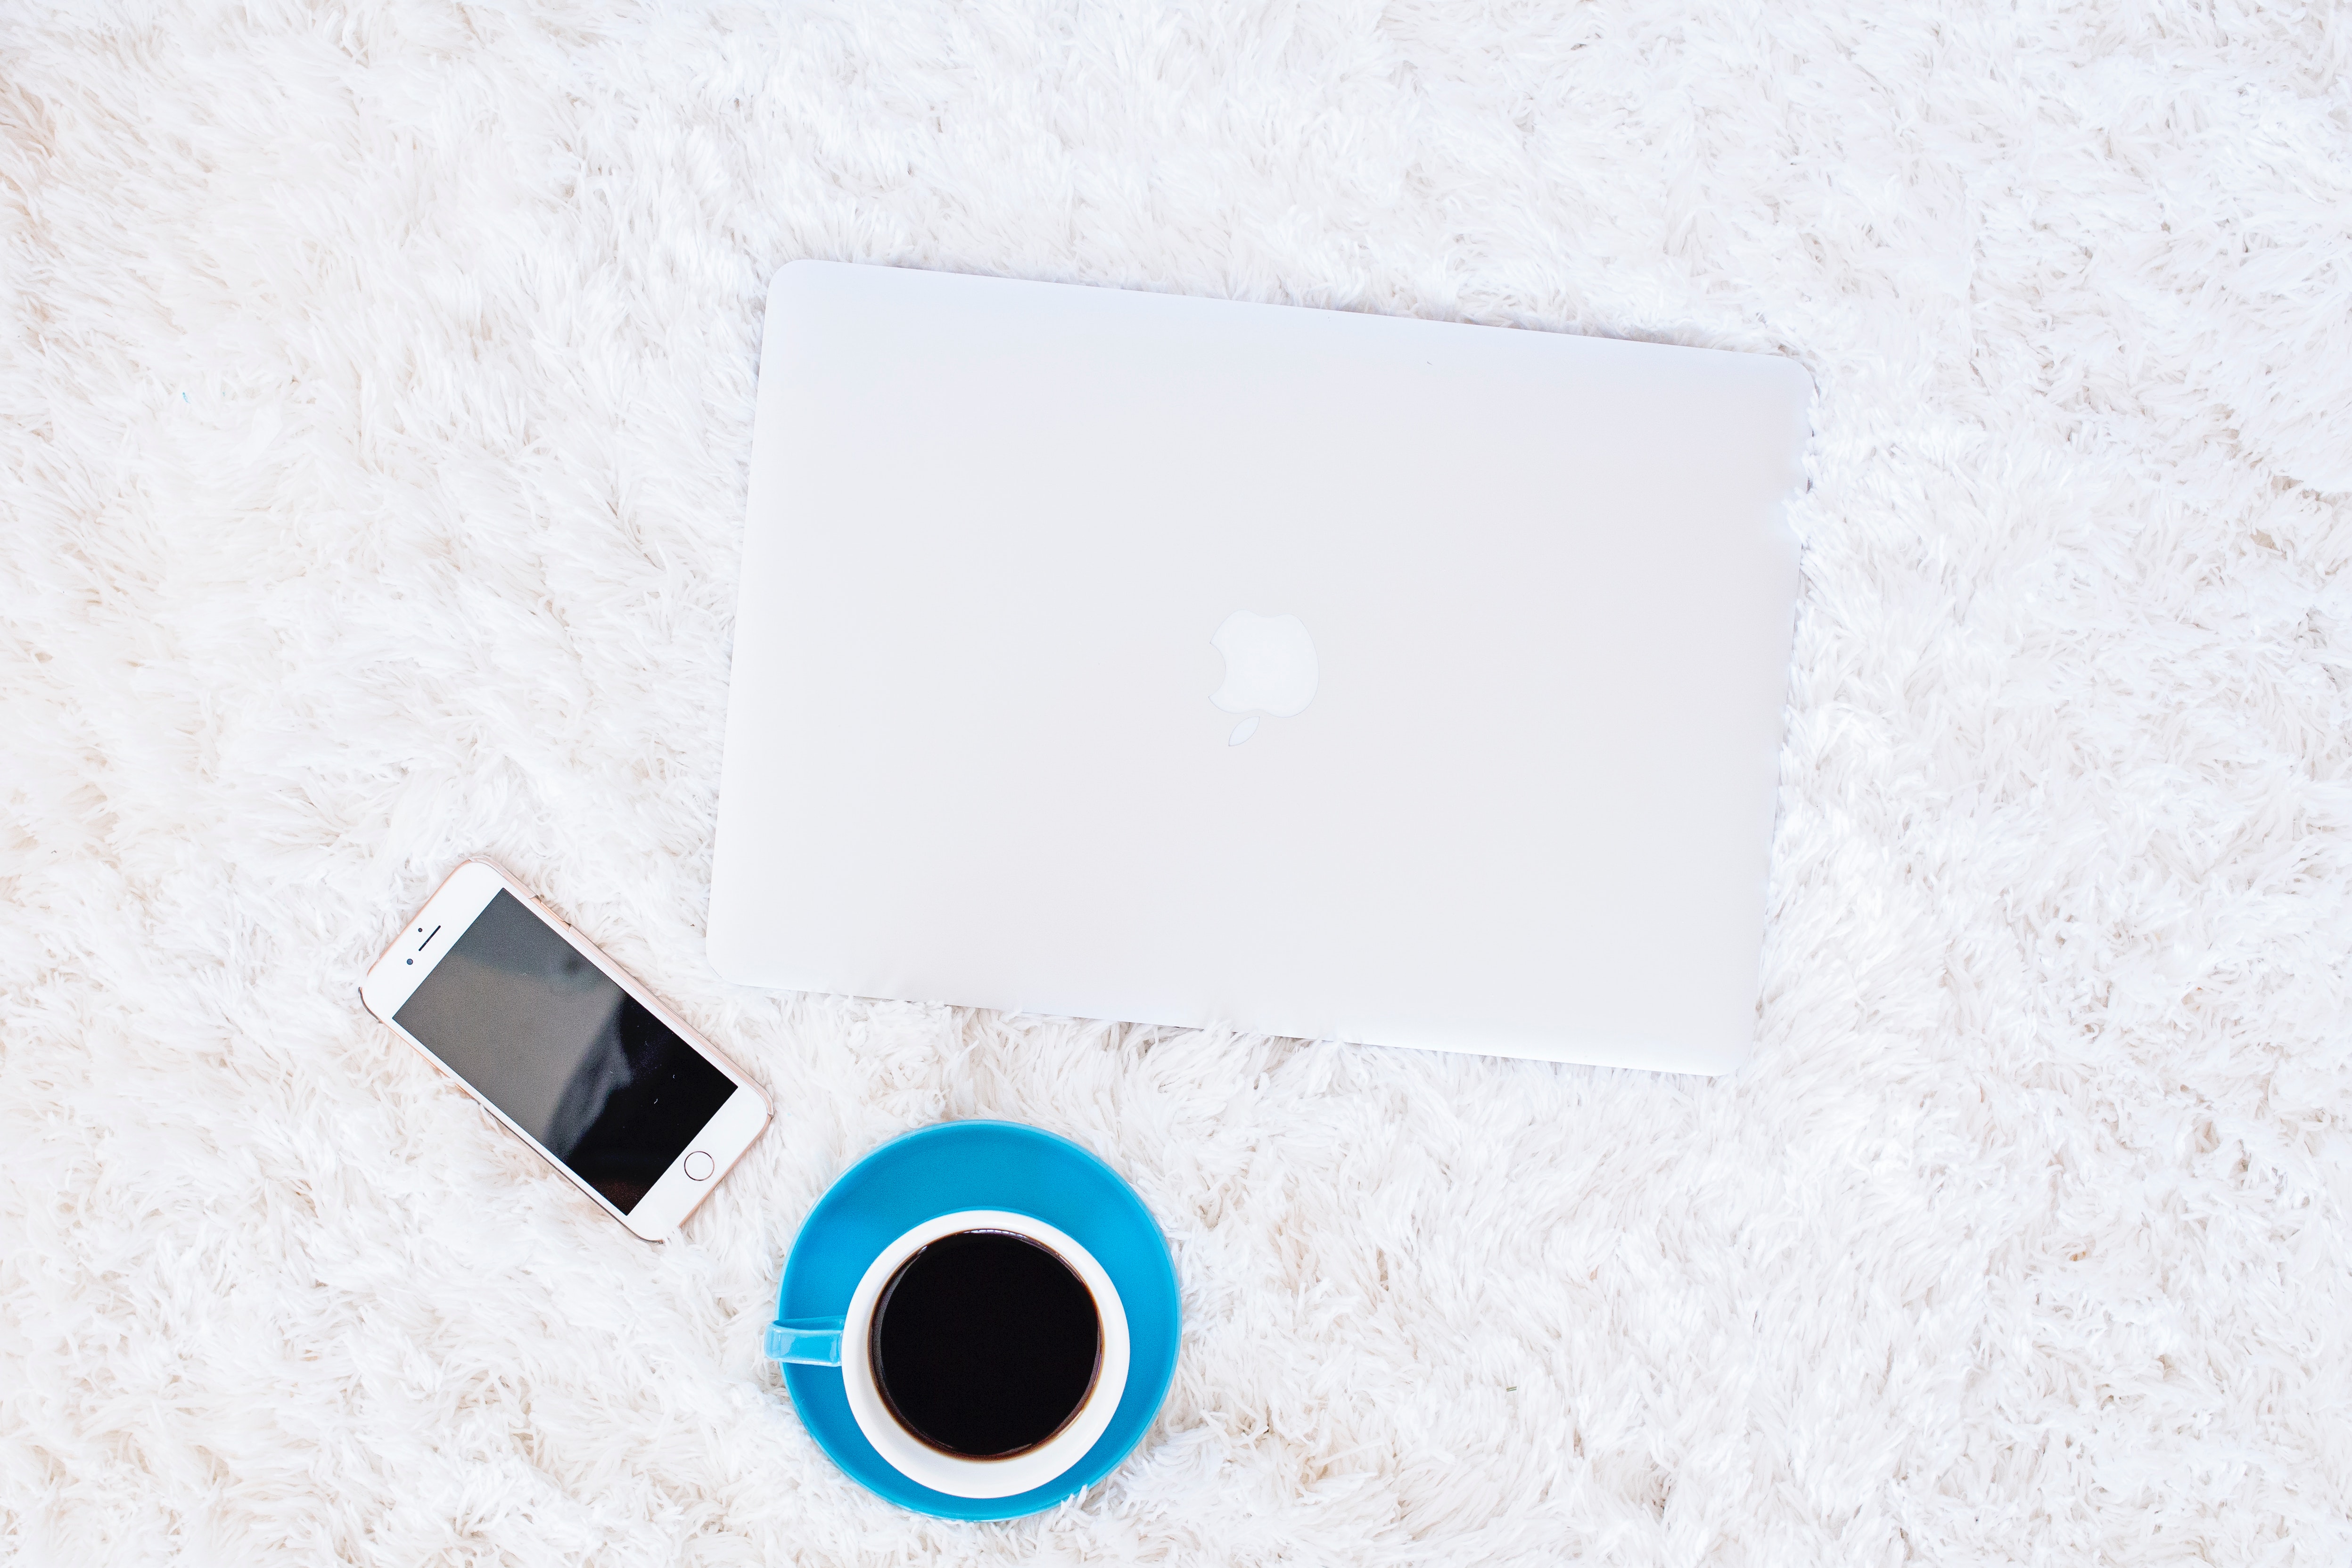 Free photo: Flat Lay Photography of Apple Devices Near Cup of Coffee ...